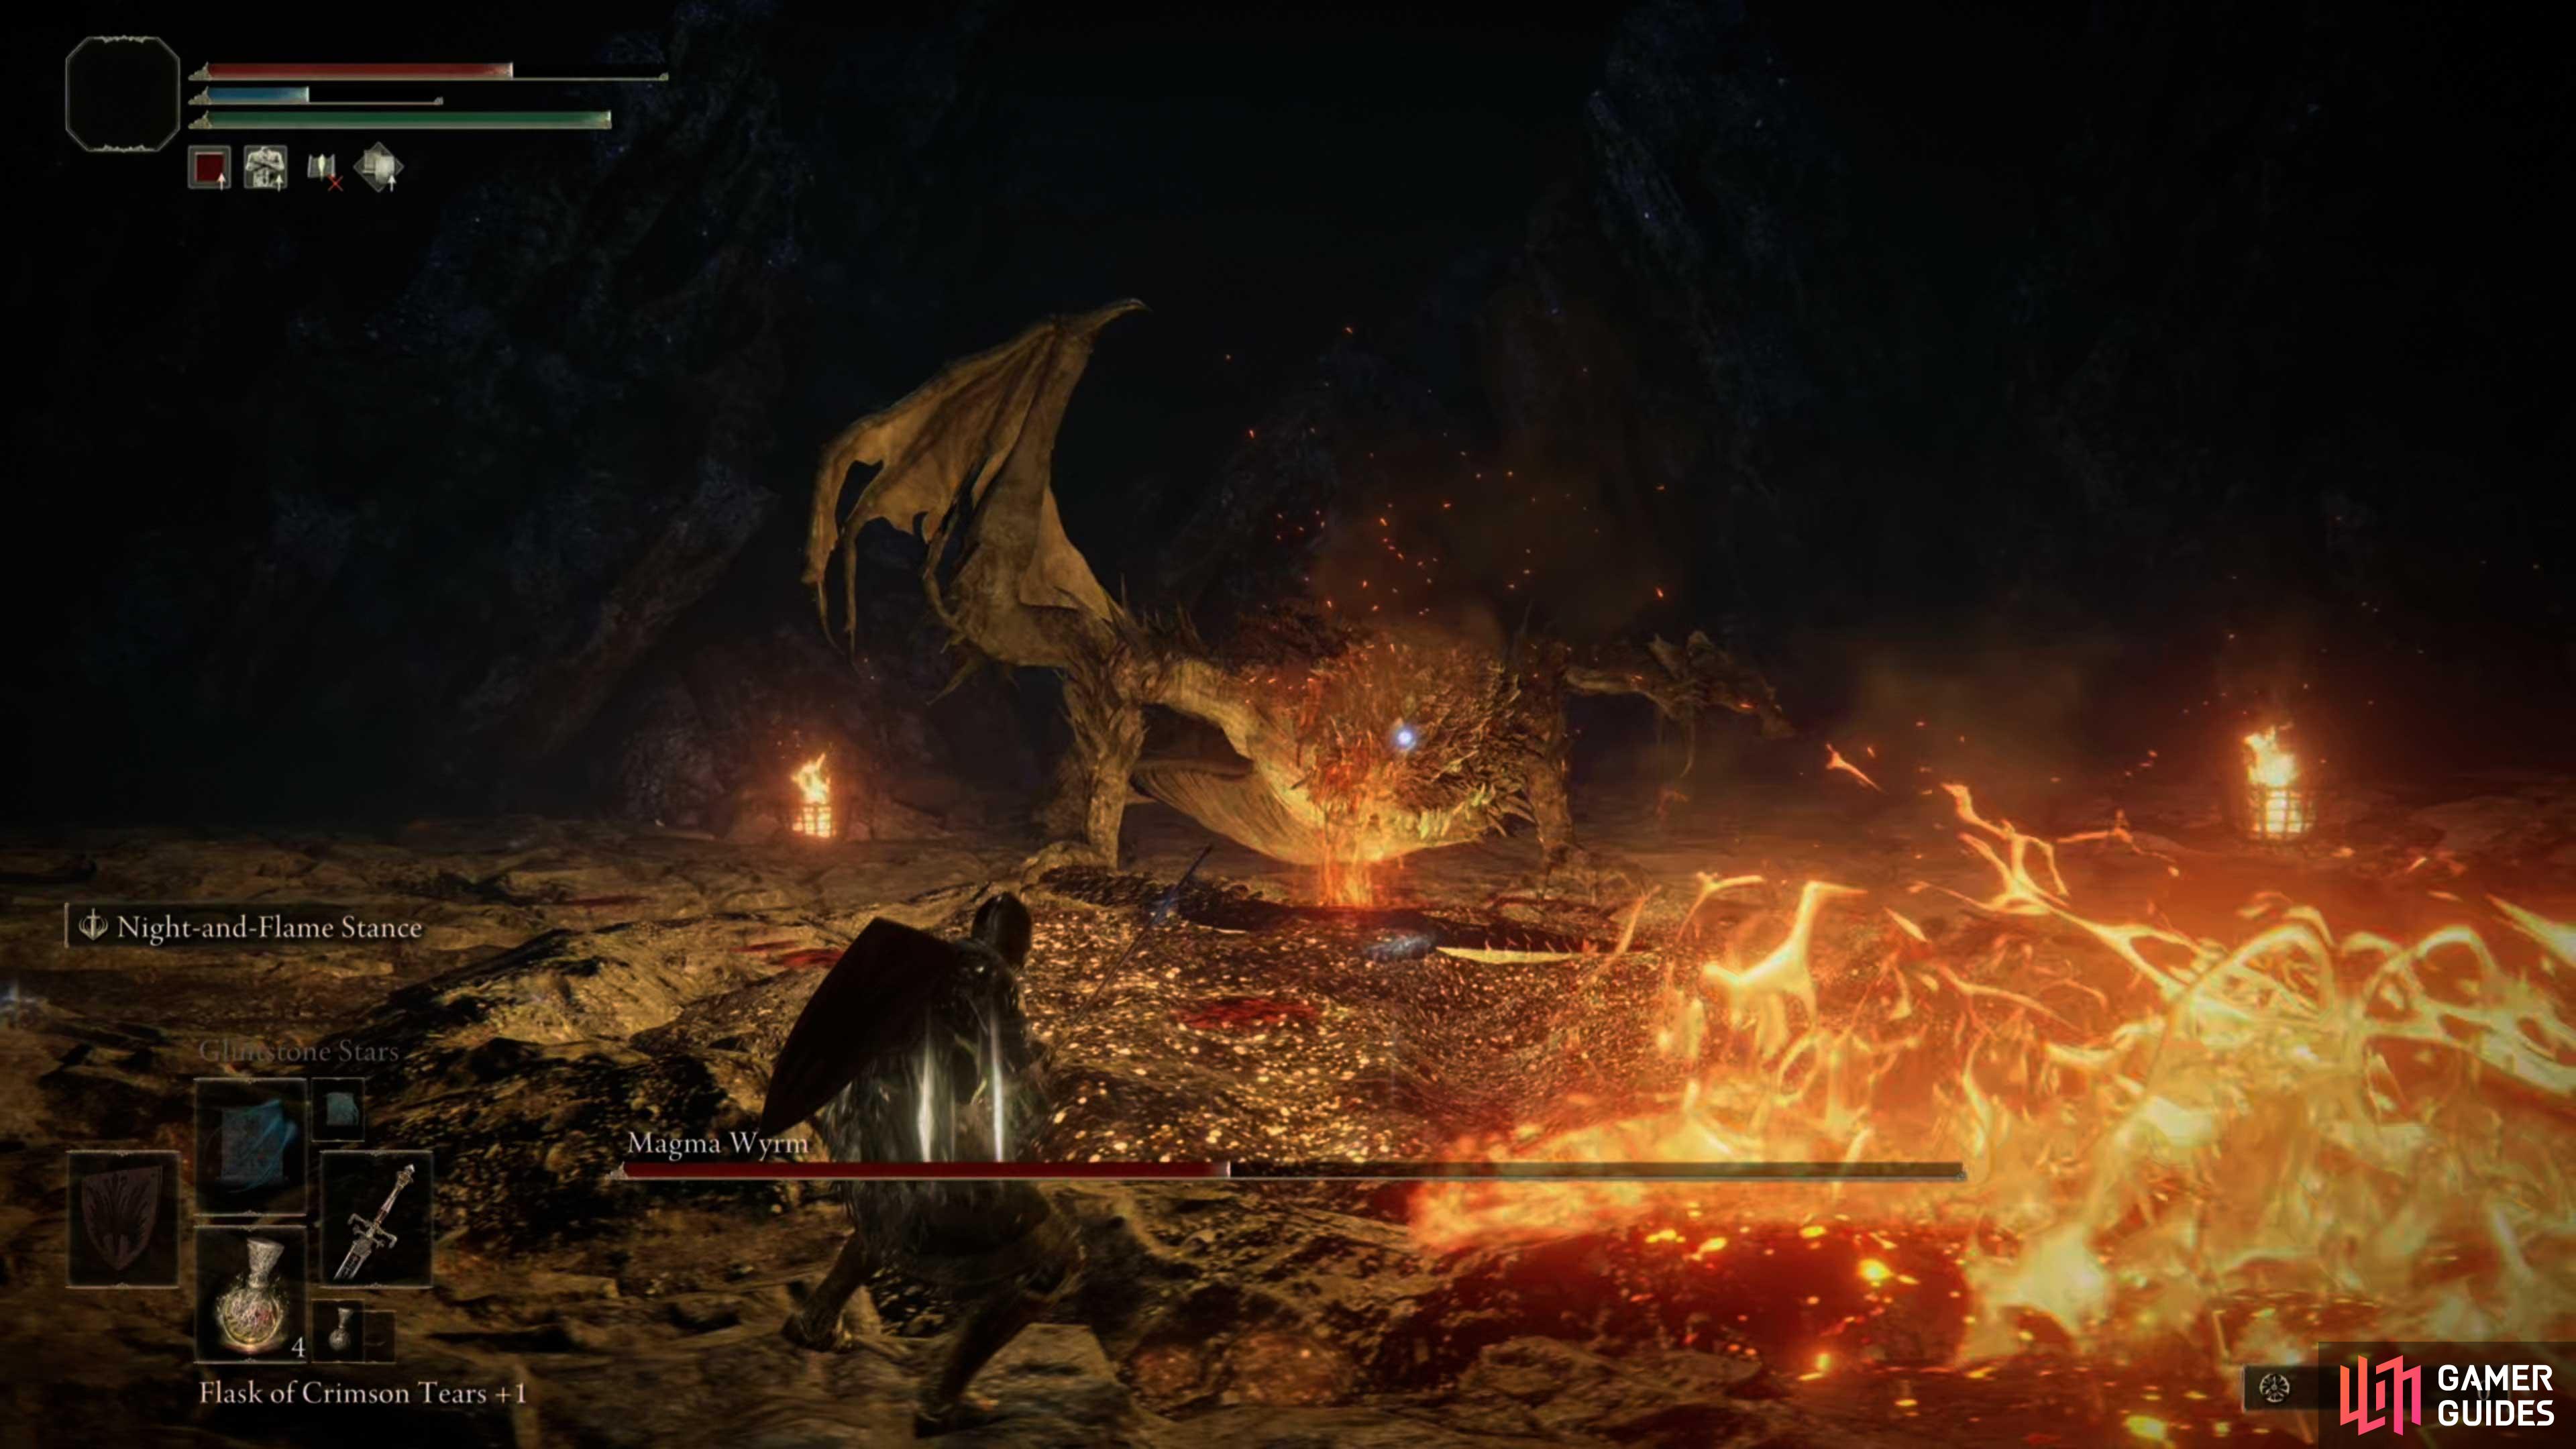 Defeat the Magma Wyrm,